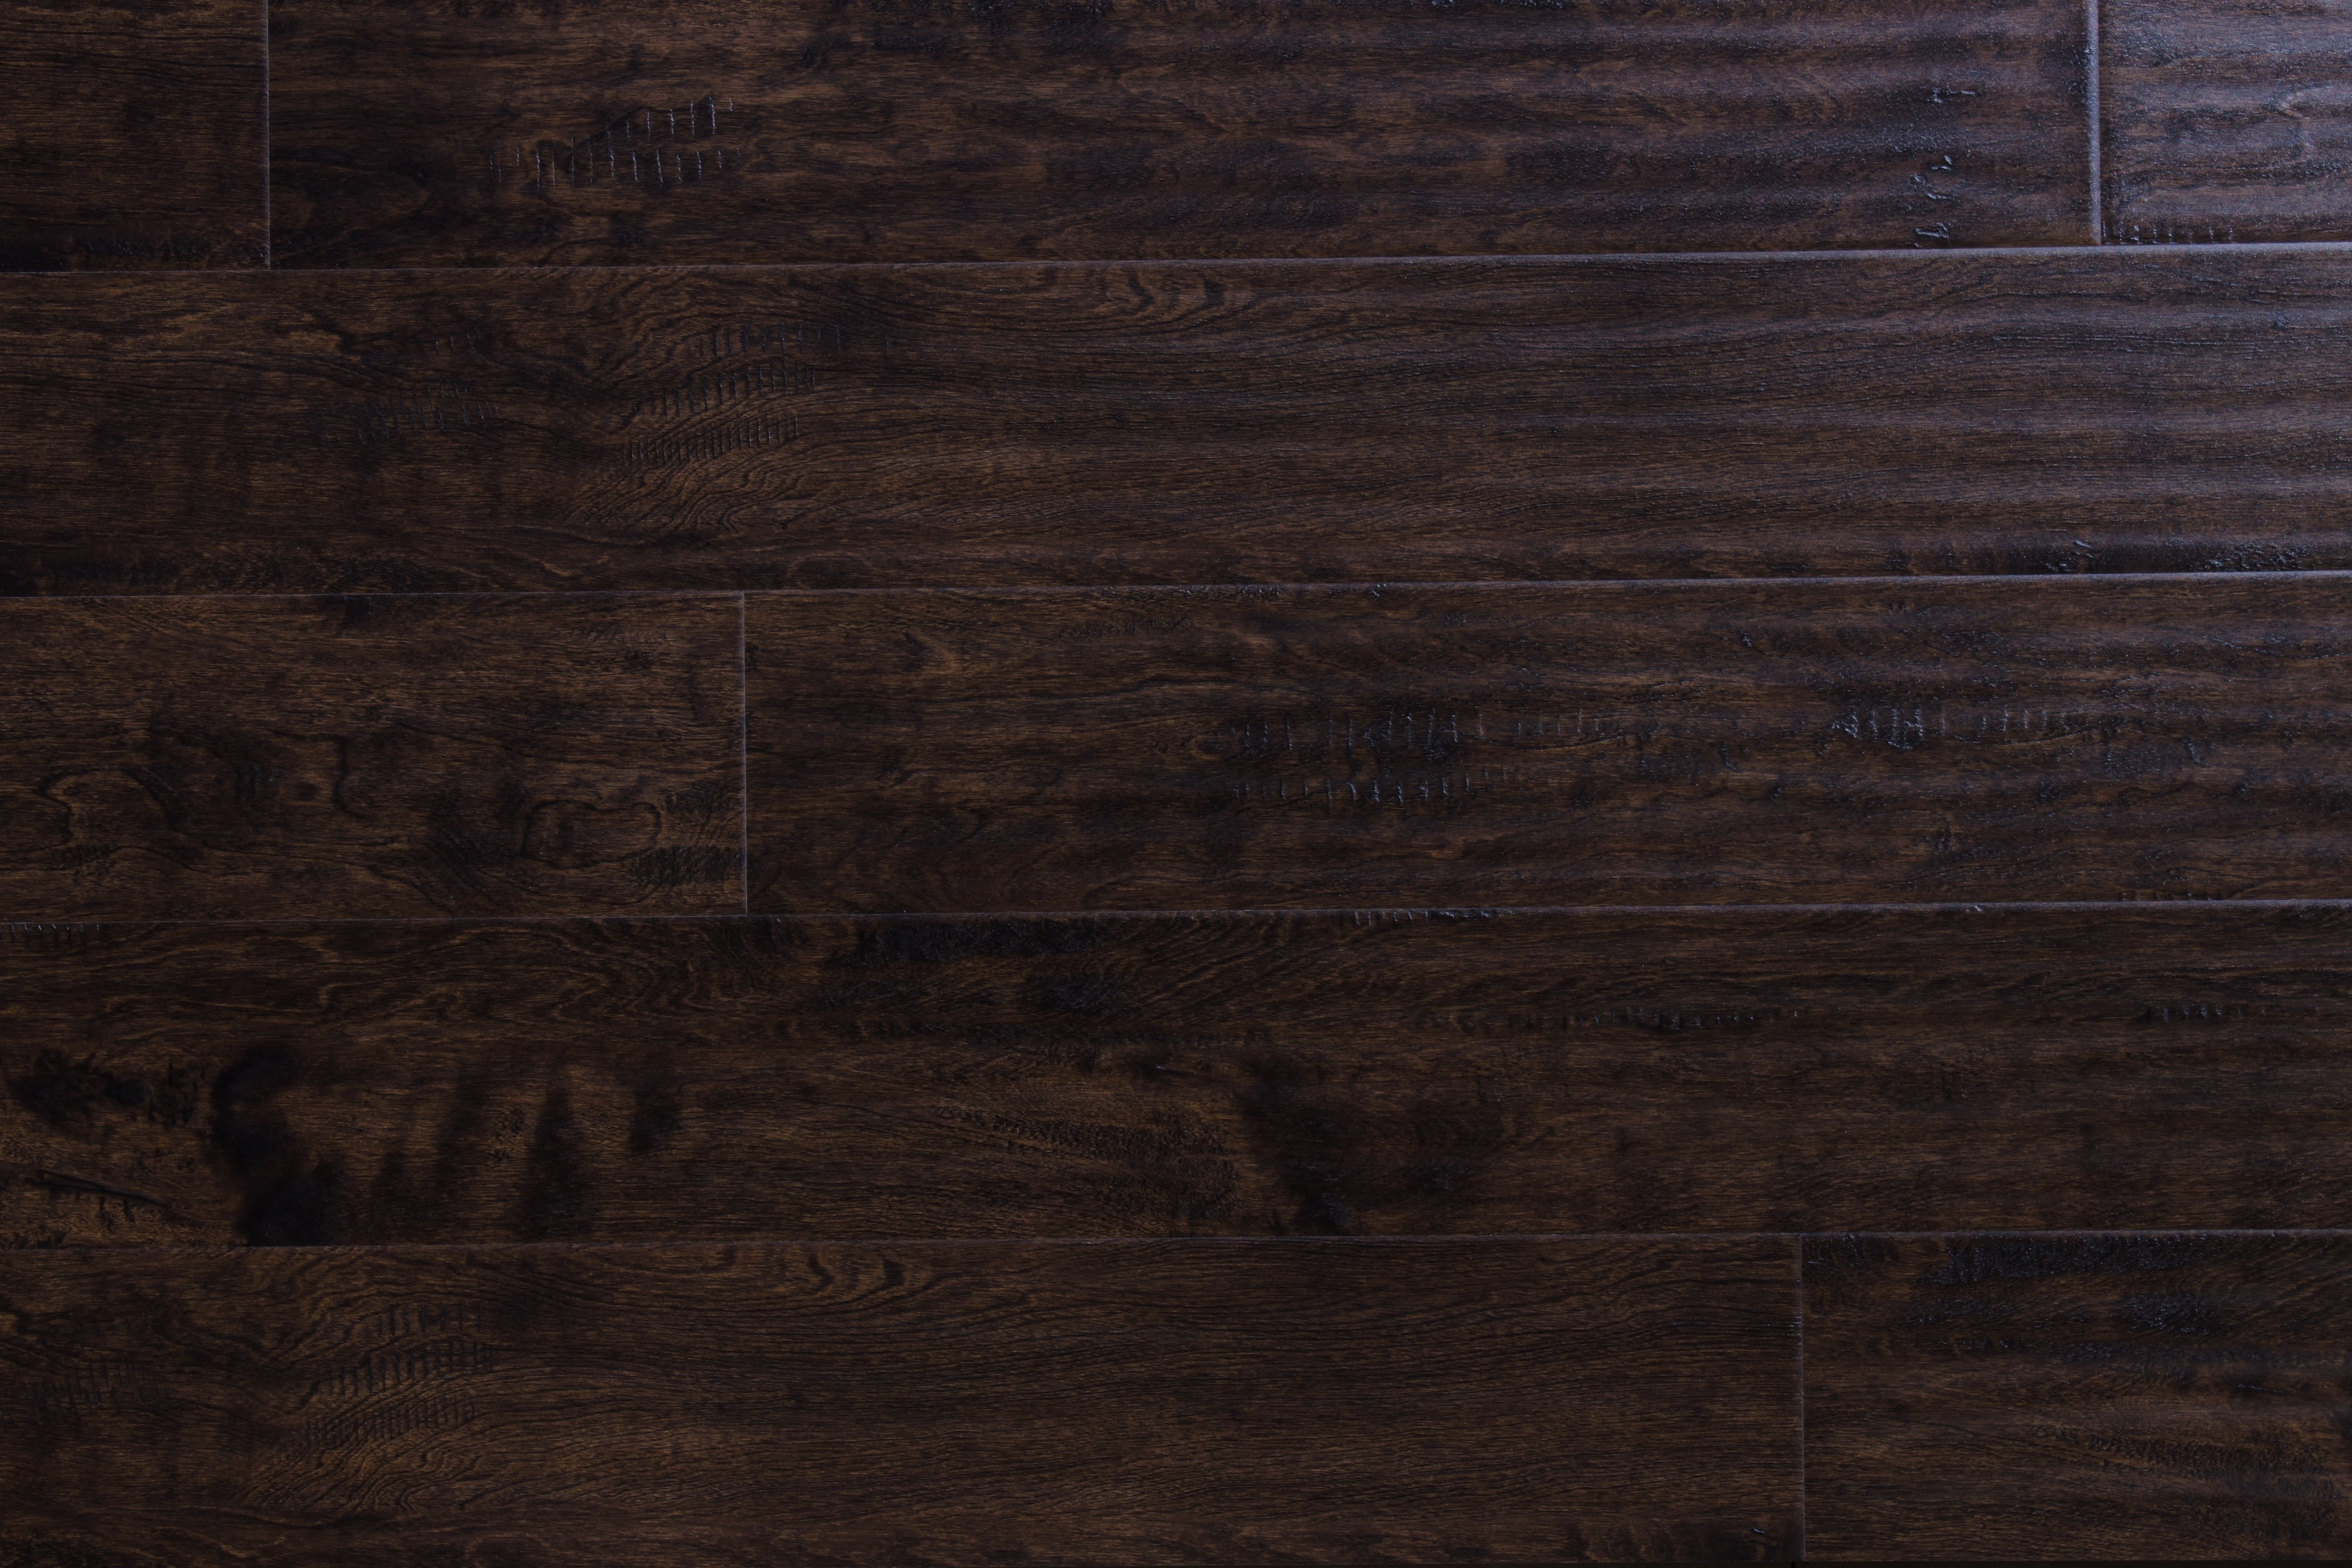 19 Famous Unfinished Maple Hardwood Flooring Sale 2024 free download unfinished maple hardwood flooring sale of wood flooring free samples available at builddirecta intended for tailor multi gb 5874277bb8d3c